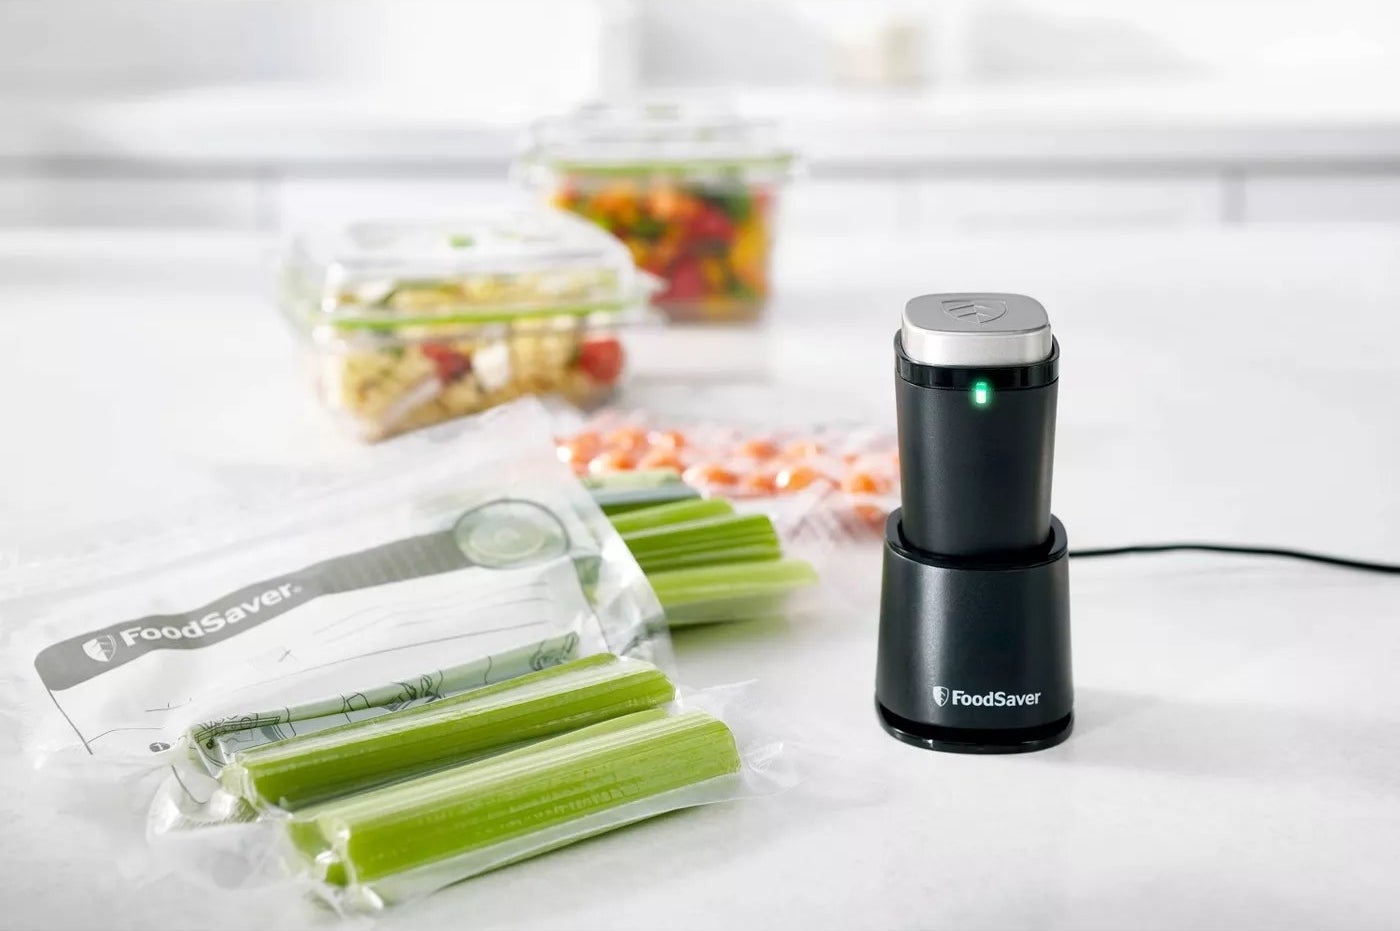 The vacuum sealer shown with bags of sealed vegetables